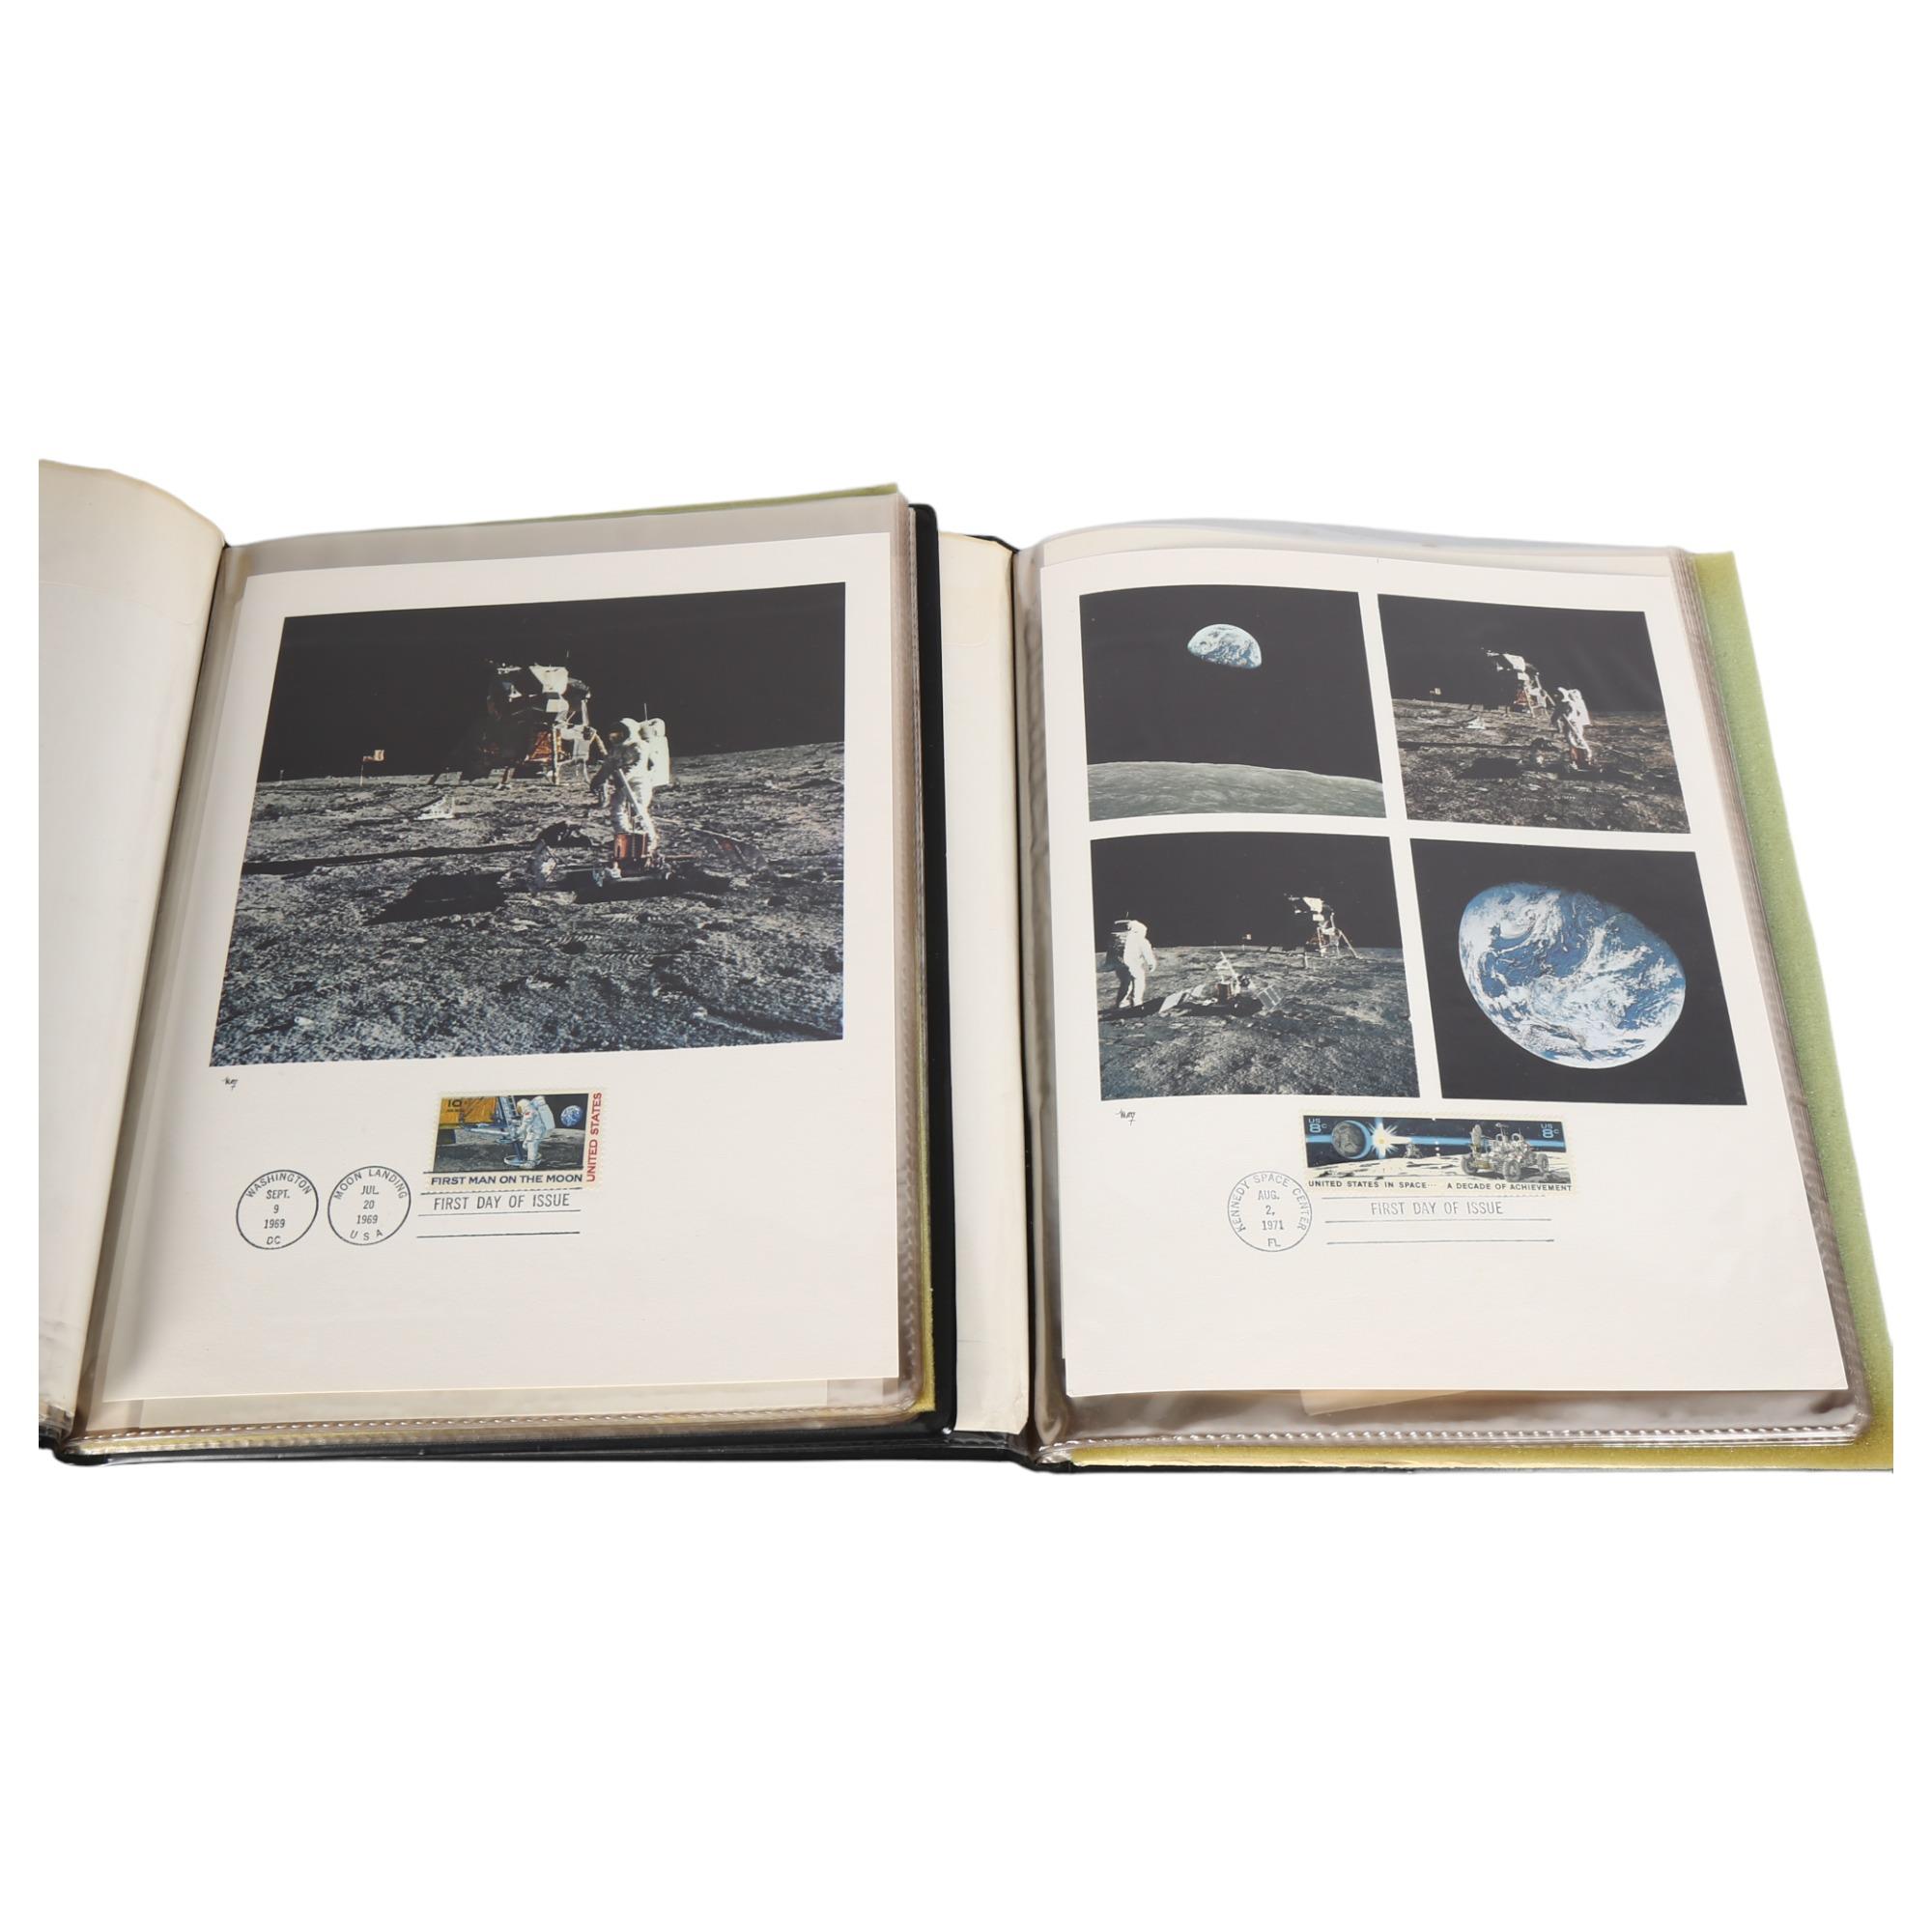 2 albums of First Day Covers relating to the moon landings, circa 1960s and '70s